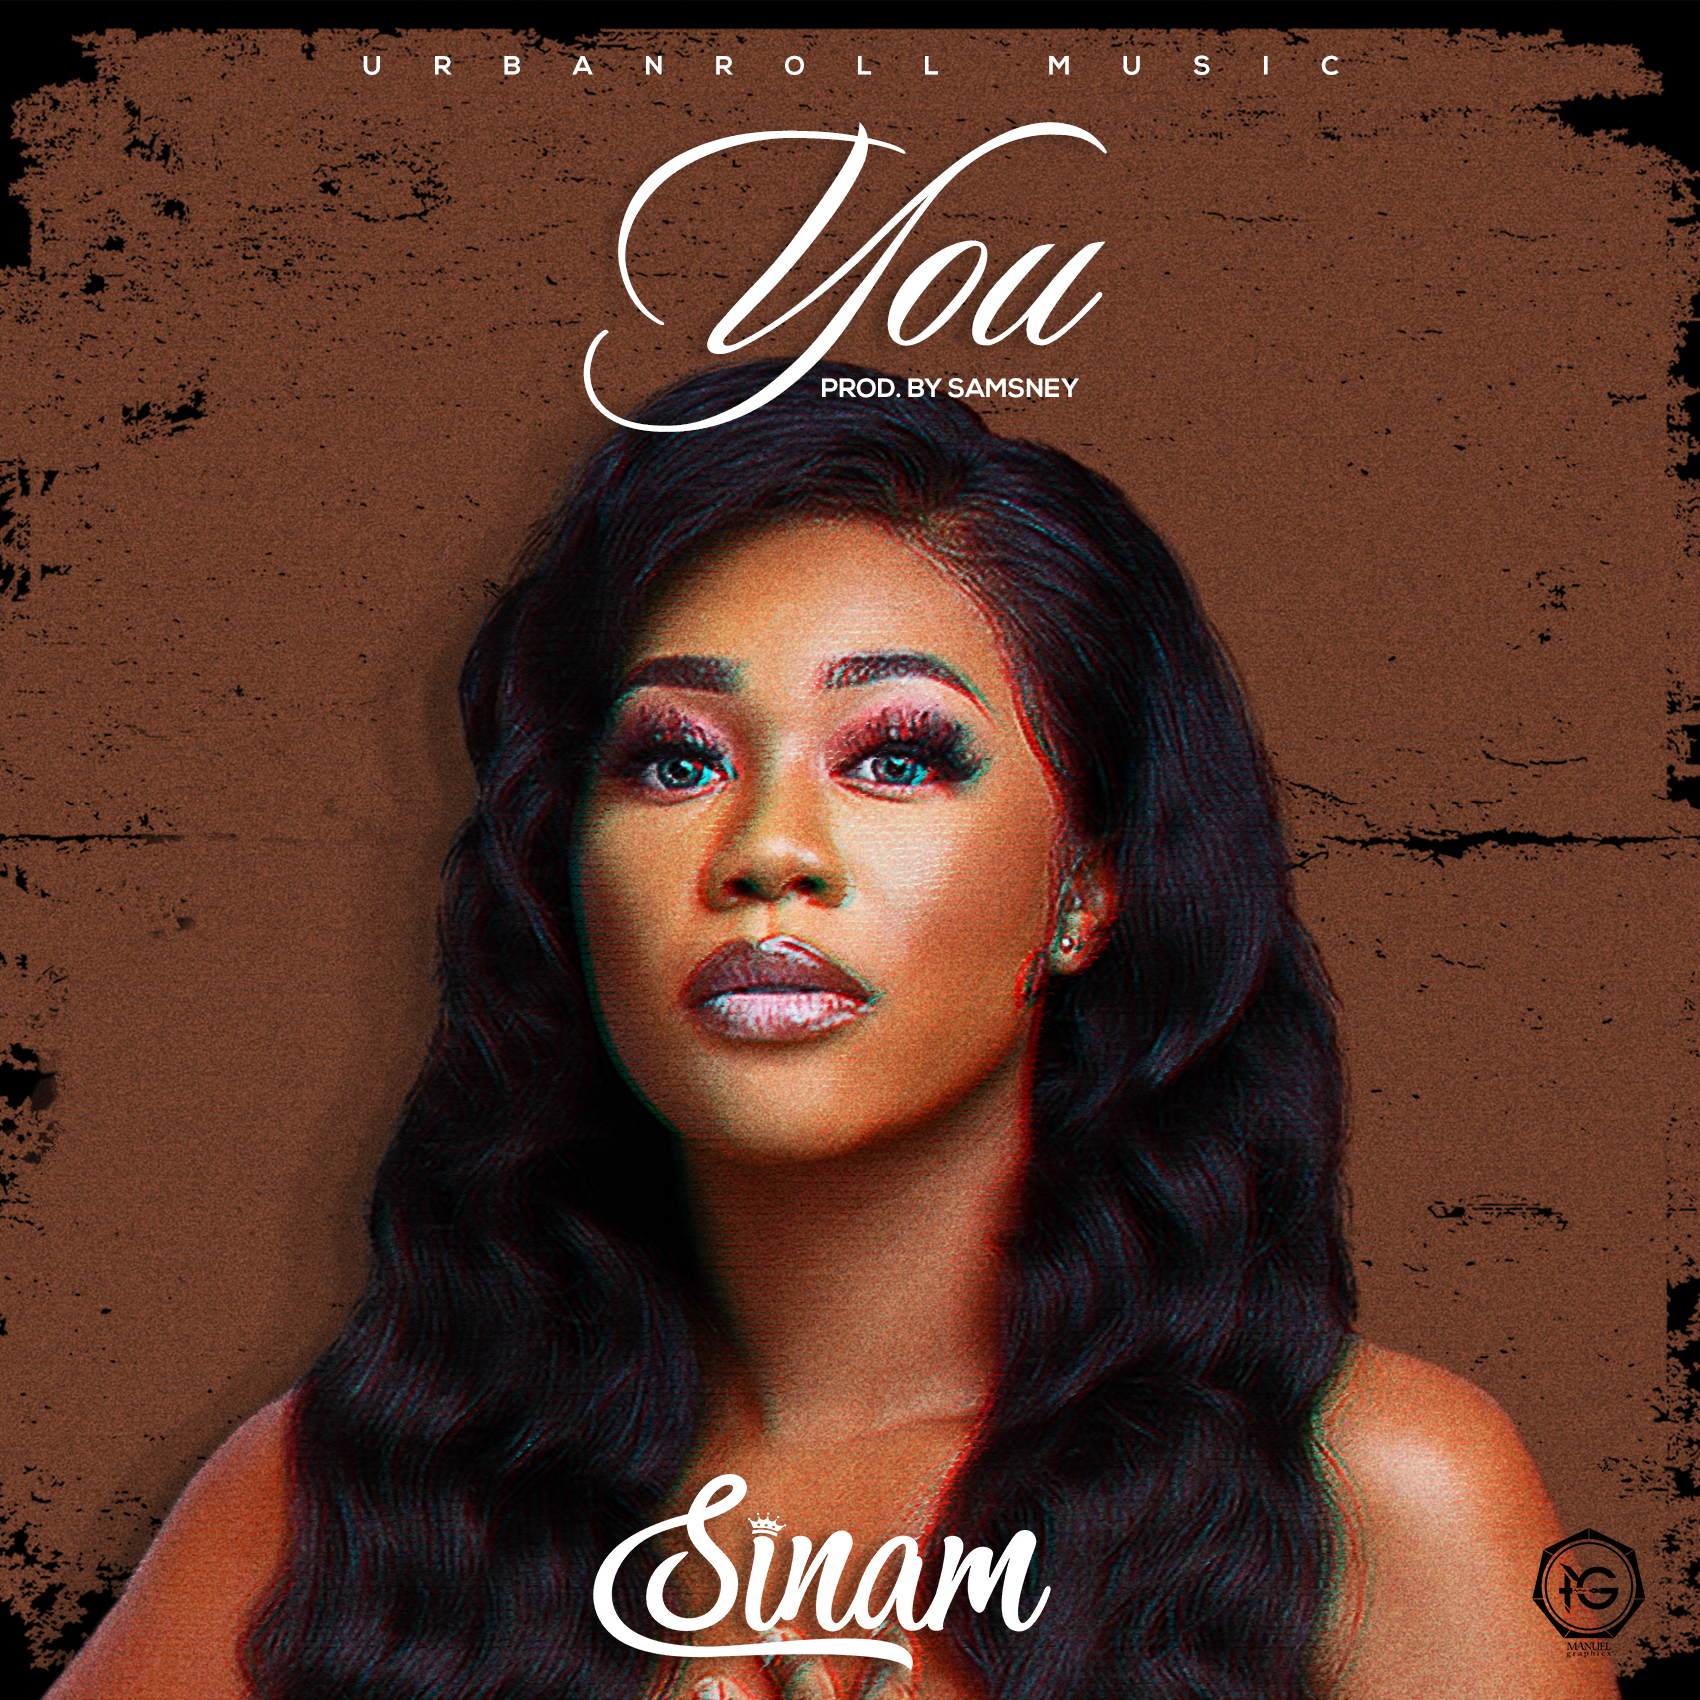 Sinam confronts her biggest fears with new song "You"